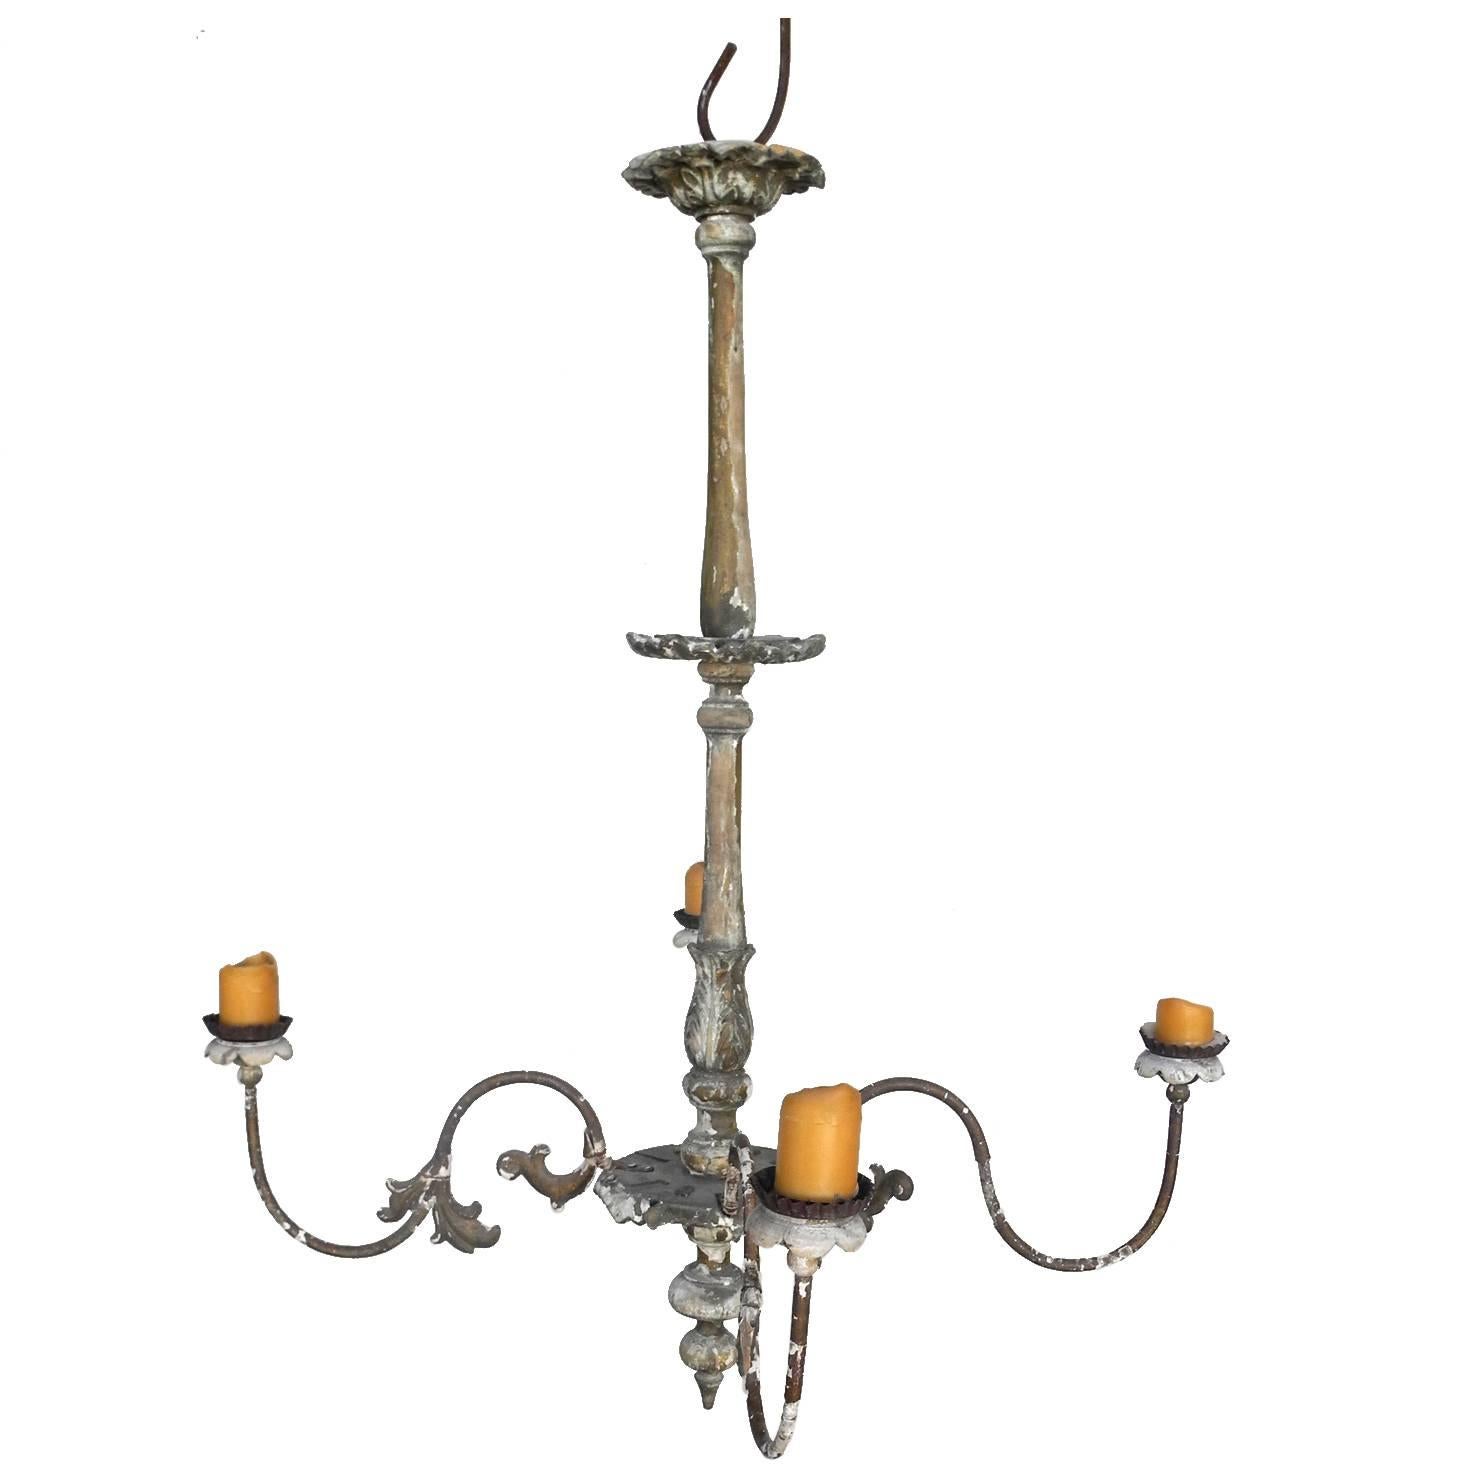 19th Century French Chandelier with Four Candelabra Arms